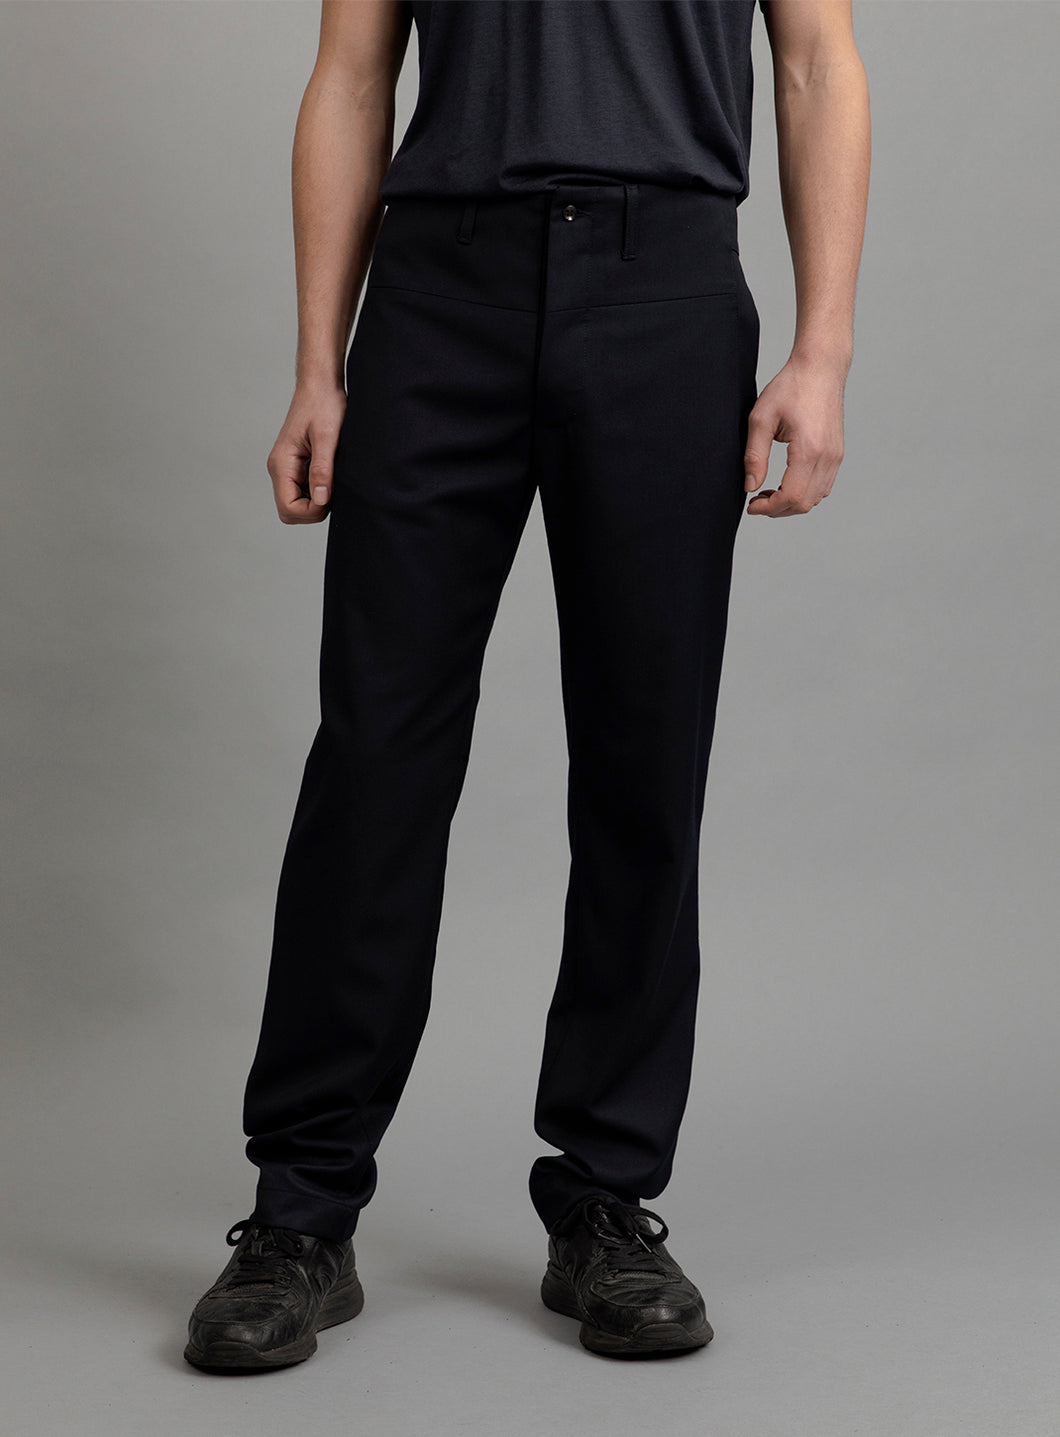 Pants with Large Waist Belt in Navy Blue Serge Fabric